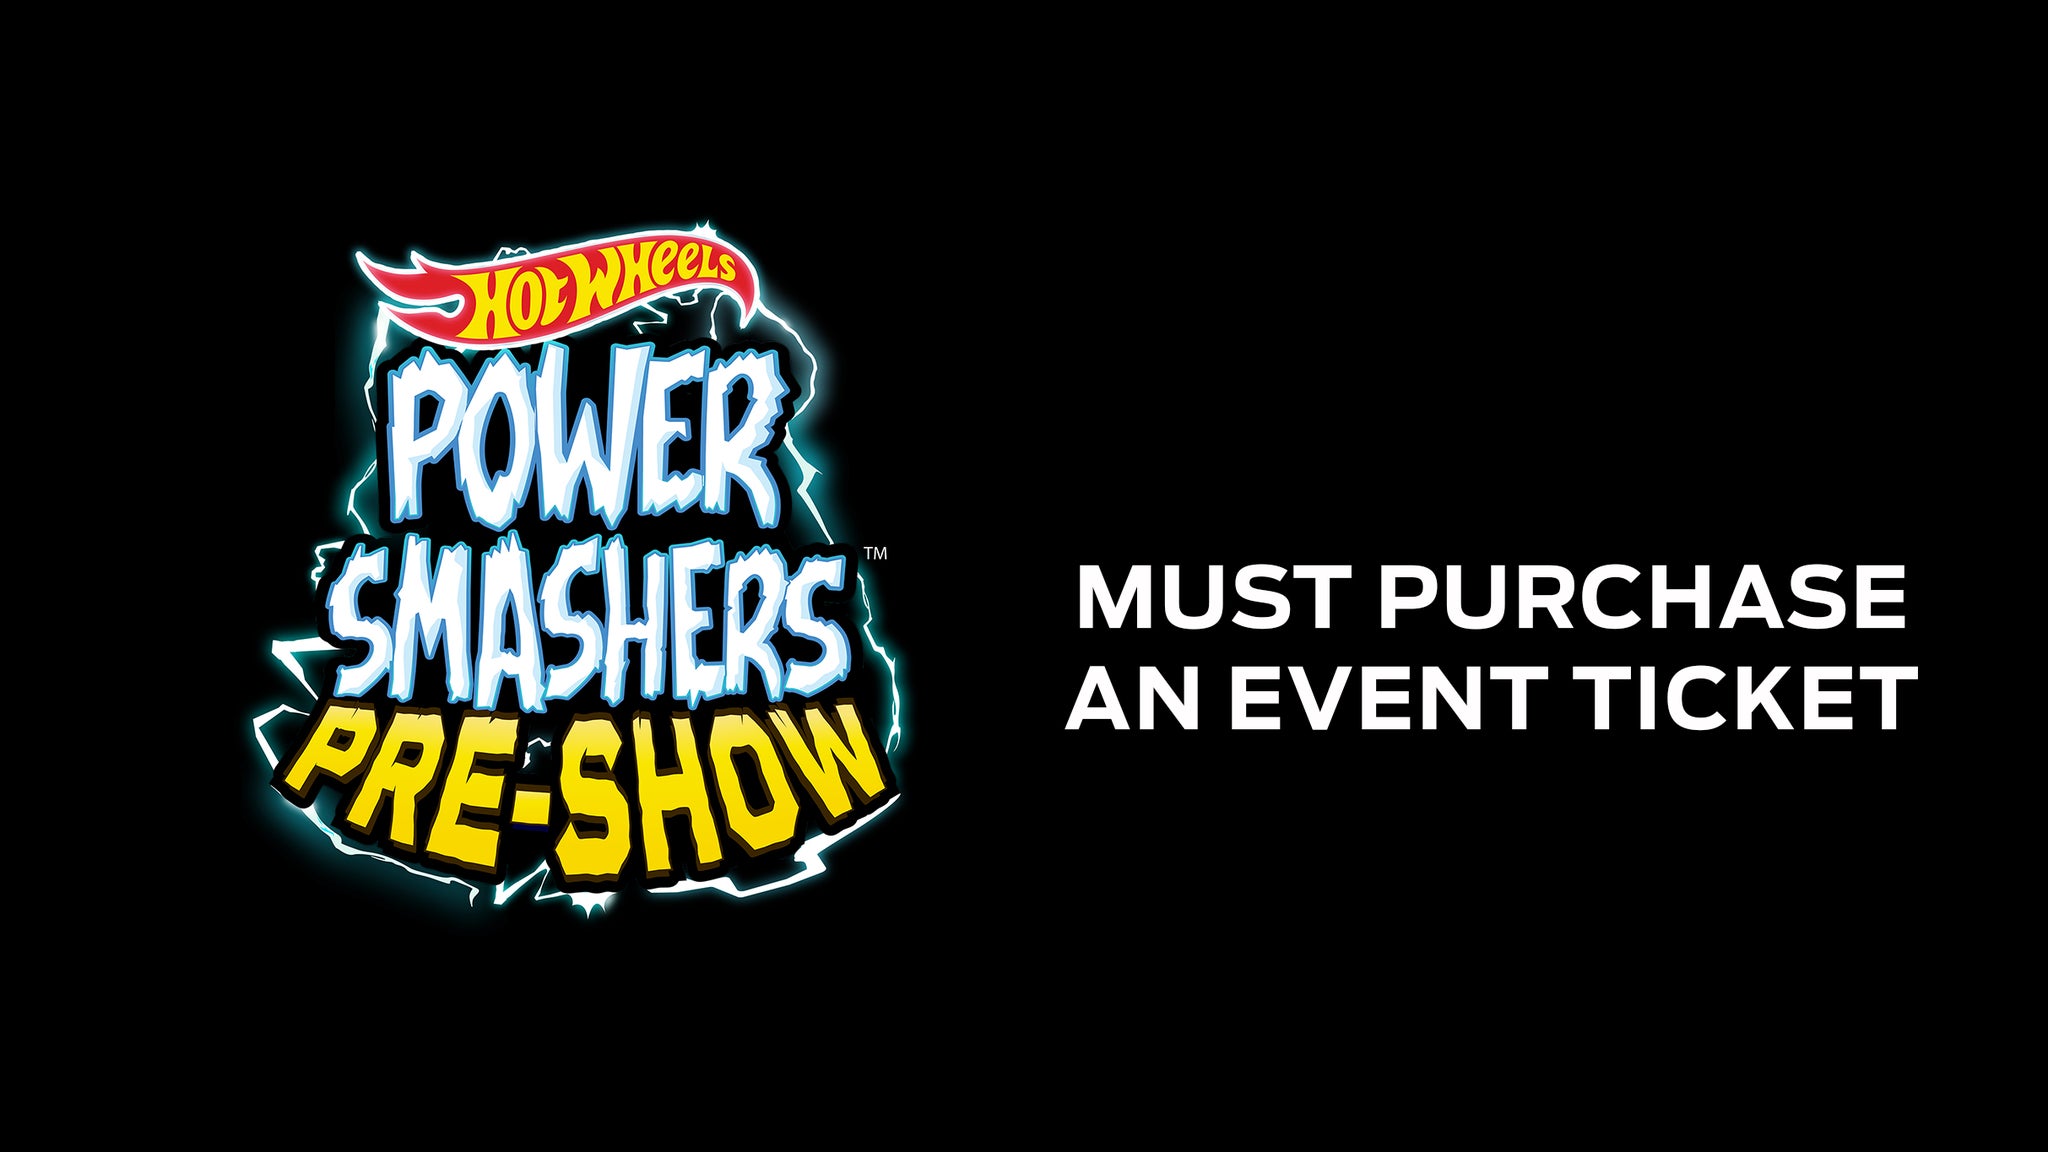 Hot Wheels Power Smashers Pre-show 5PM